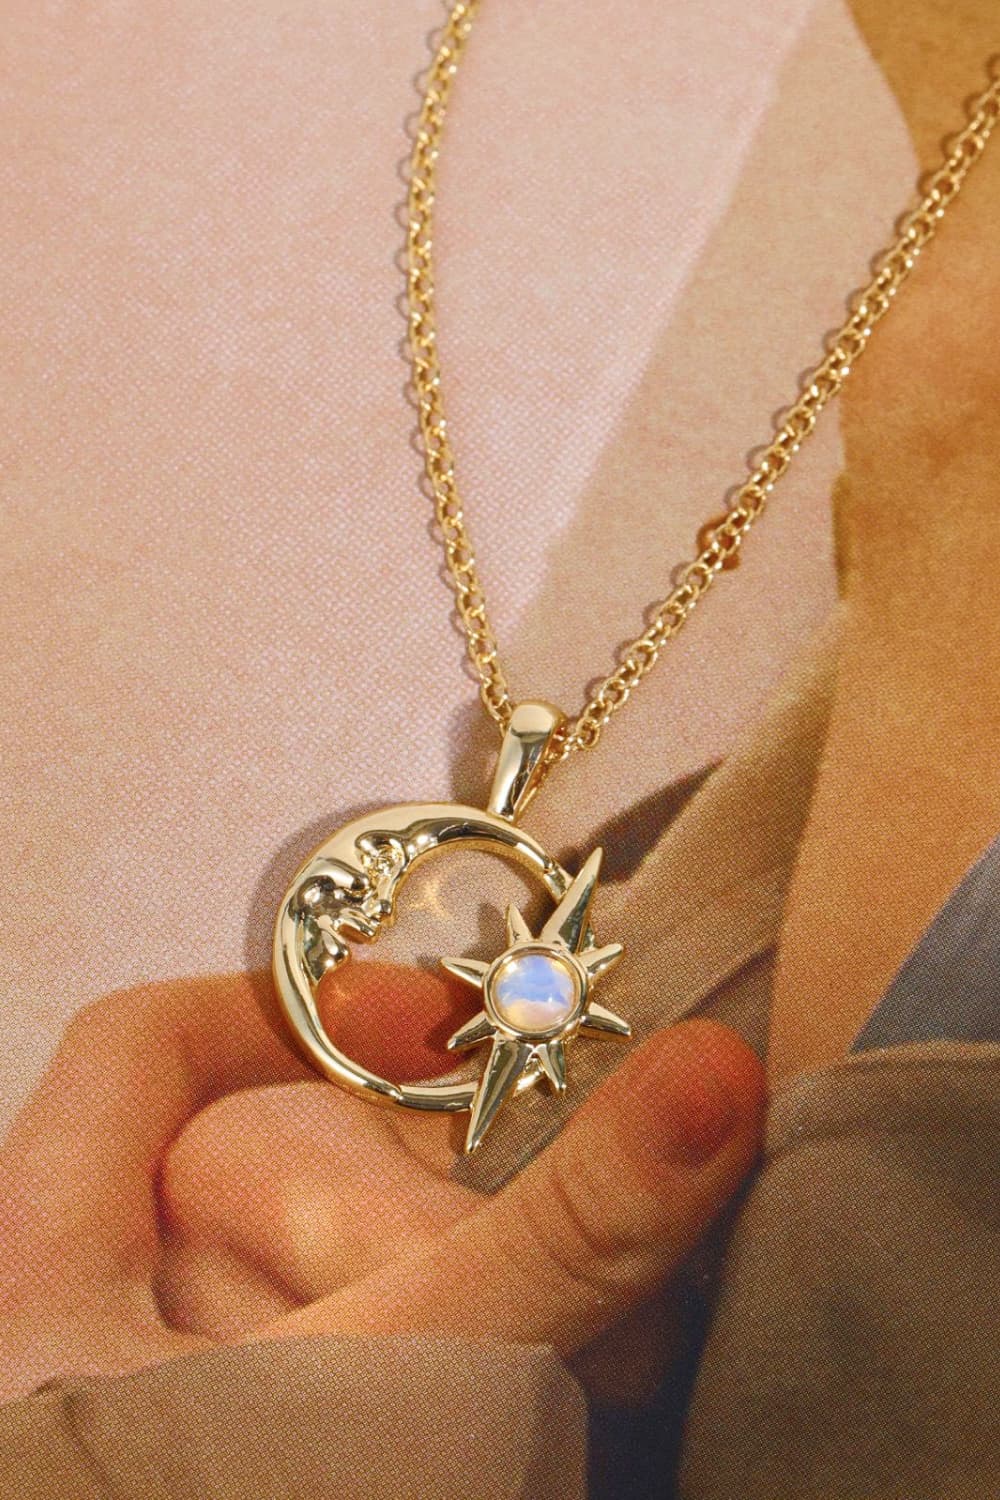 Copper 14K Gold Plated Moon & Star Shape Pendant Necklace